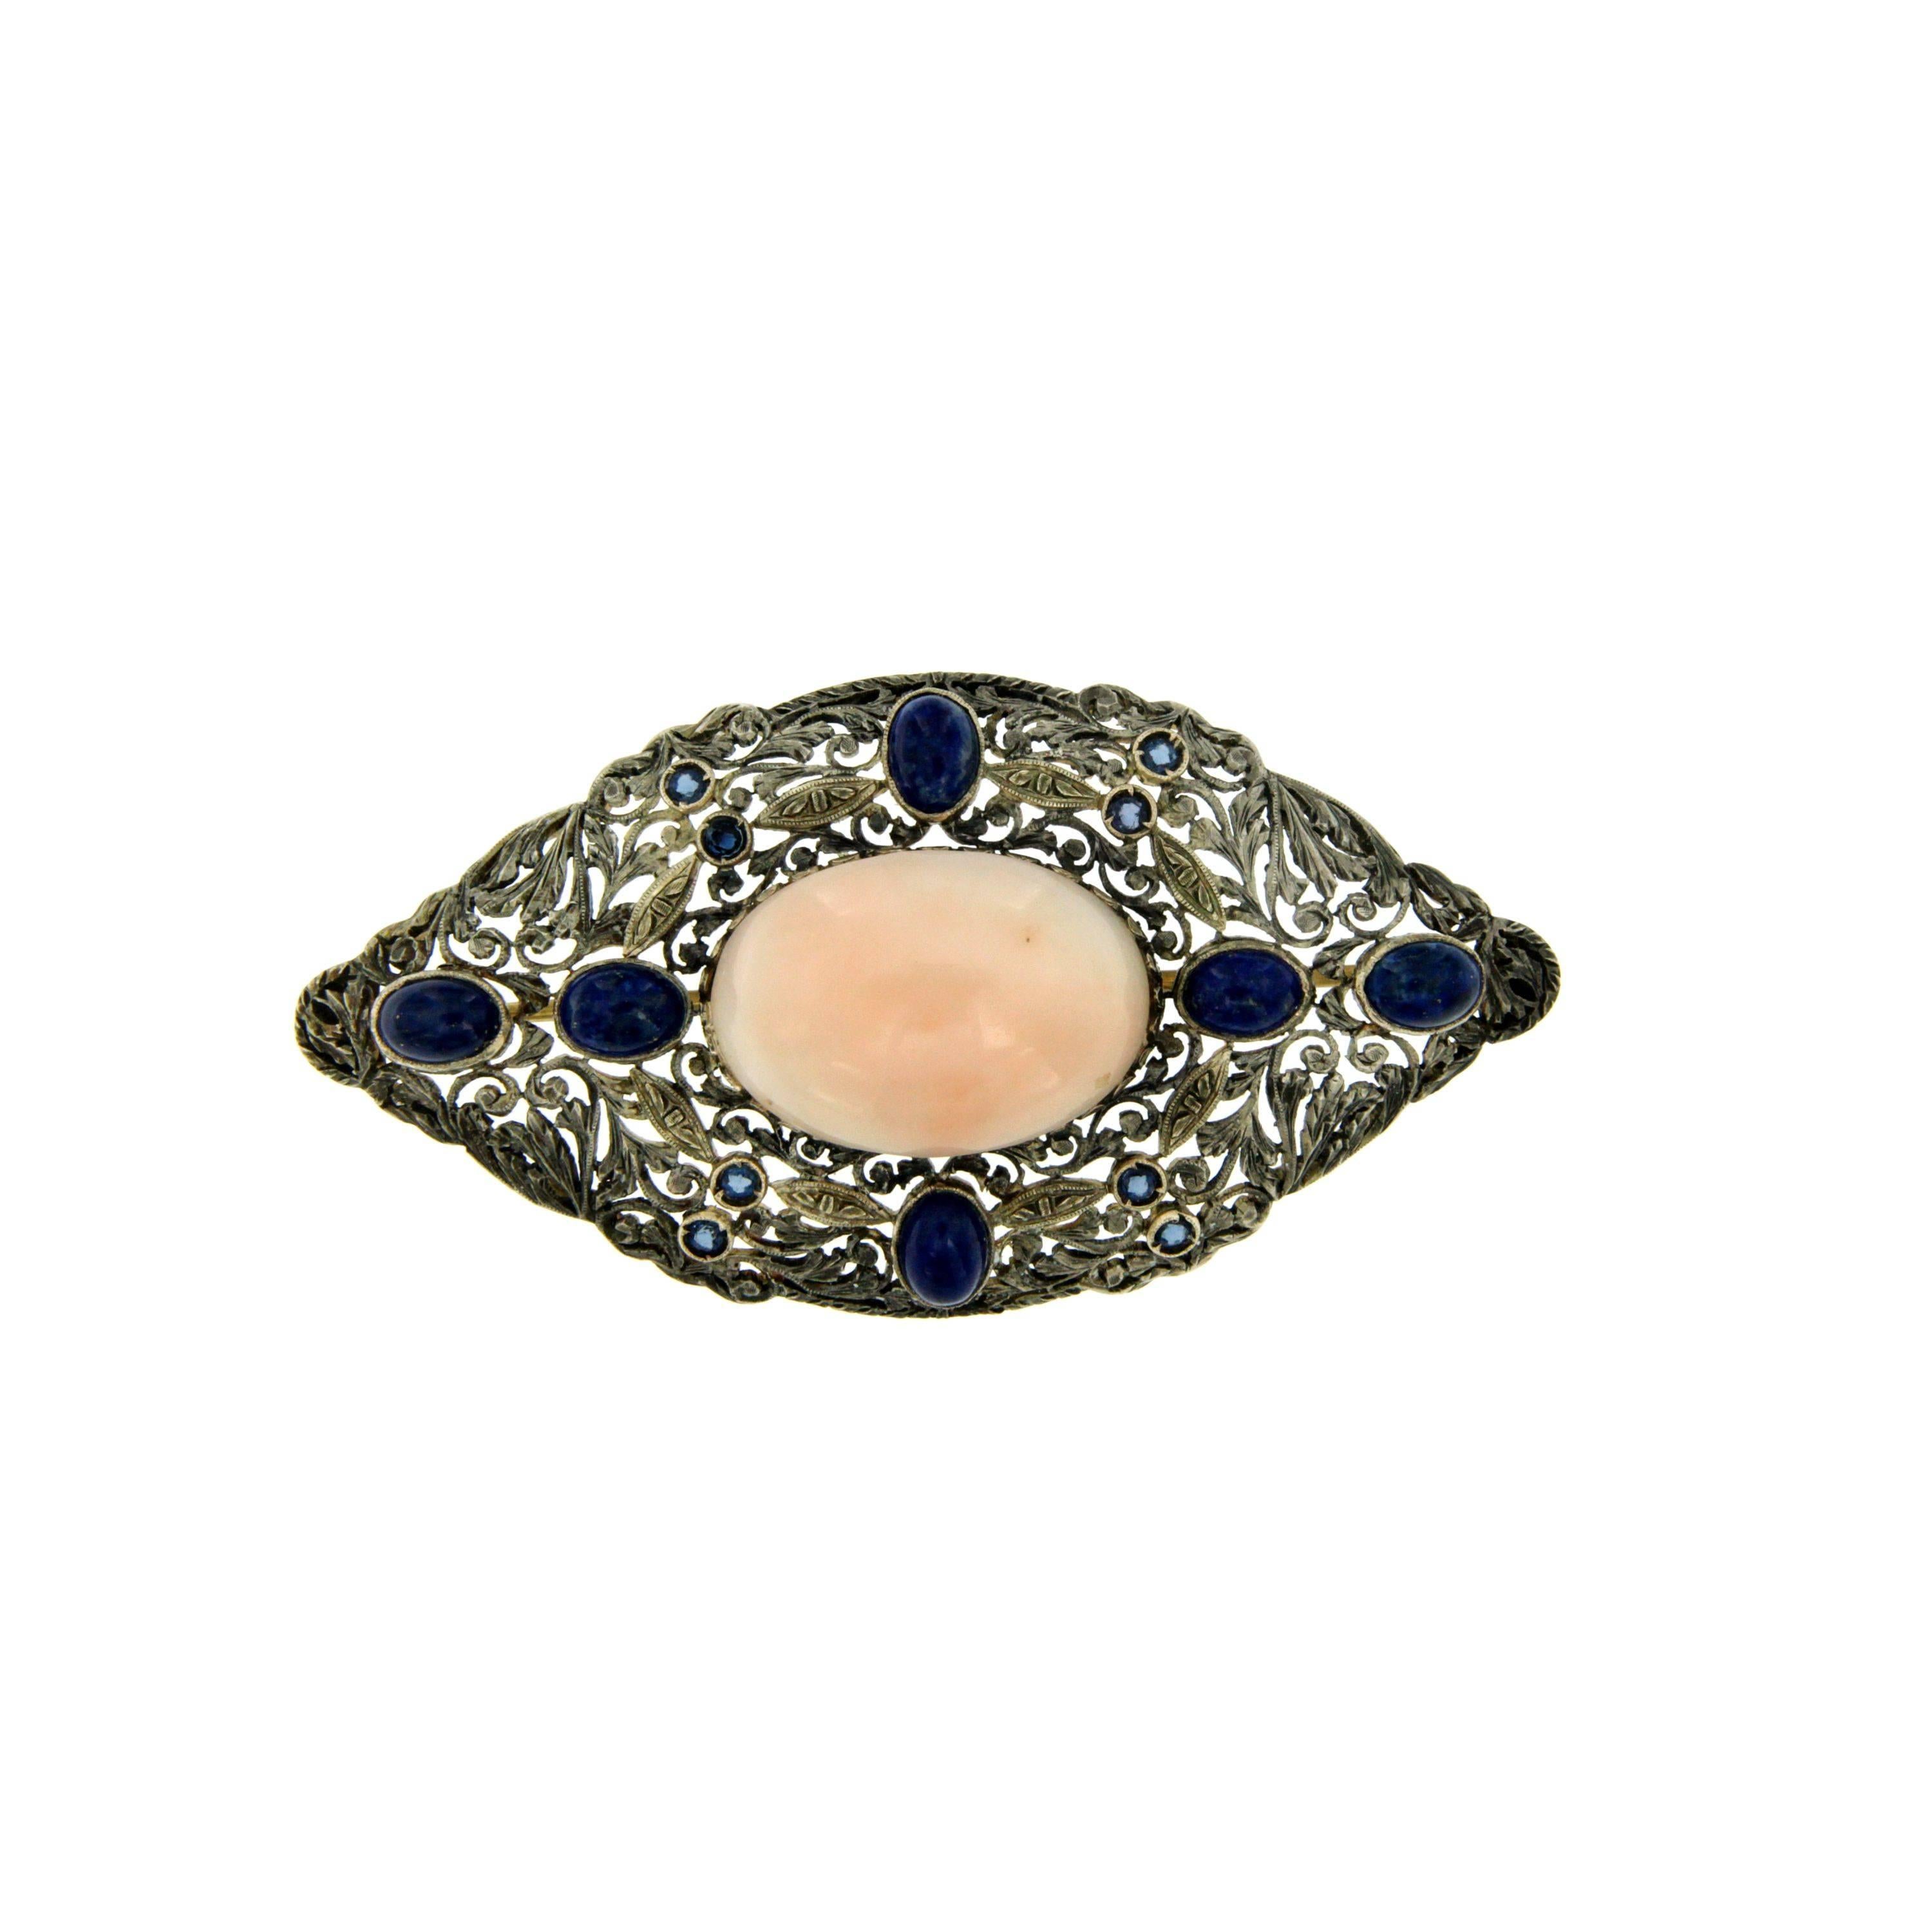 A Victorian brooch with a central light pink Coral flanked by Lapis Lazuli and small sapphires. Circa 1890

CONDITION: Pre-owned - Excellent 
METAL: 12k Gold and Silver
DESIGN ERA: Victorian - Circa 1890
WEIGHT: 12.30 grams
MEASURES: height 1.29 in